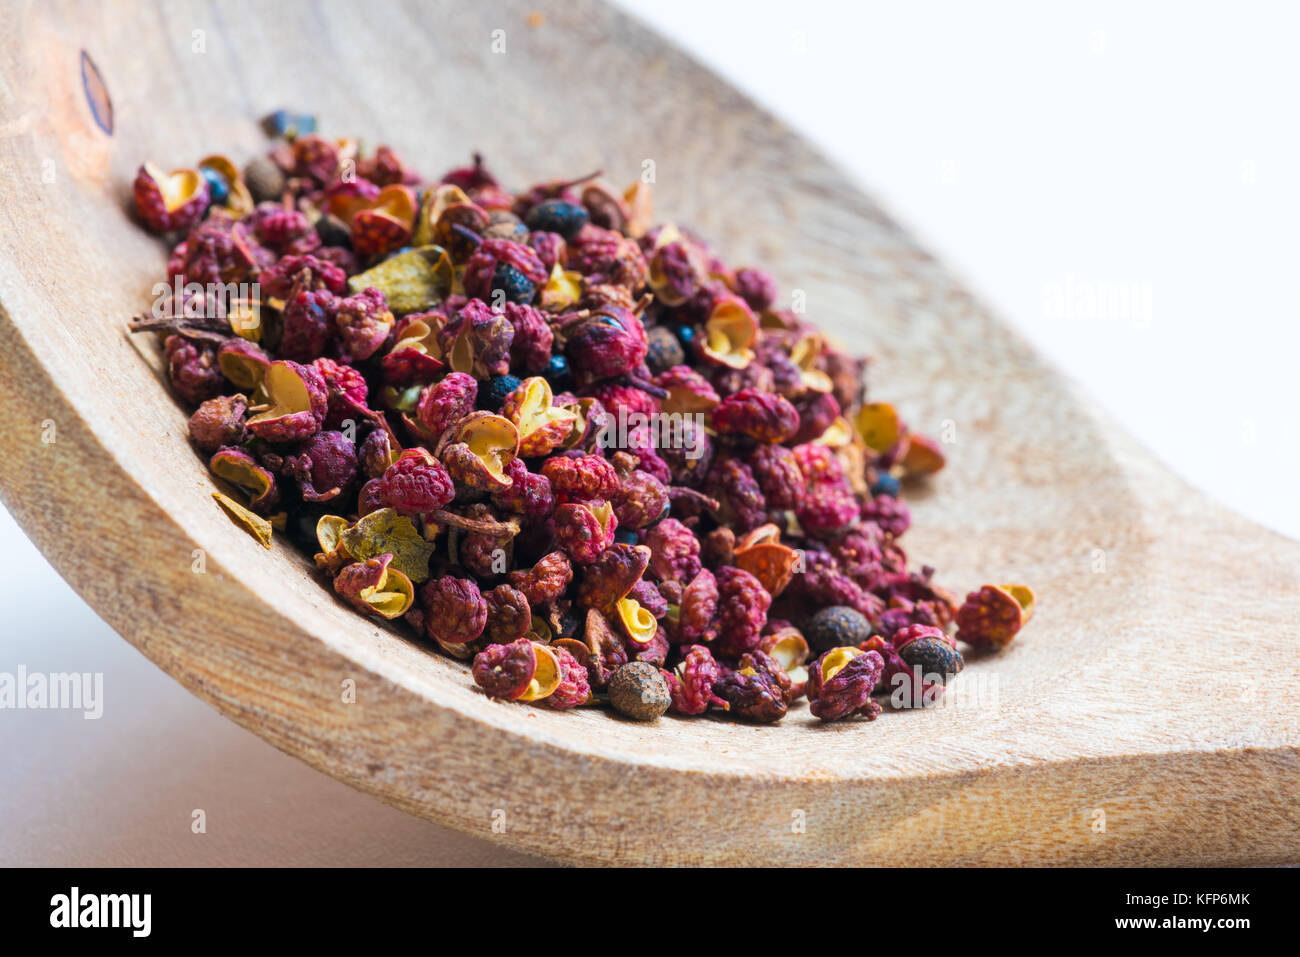 Sichuan red peppercorn closeup in a wood spoon Stock Photo